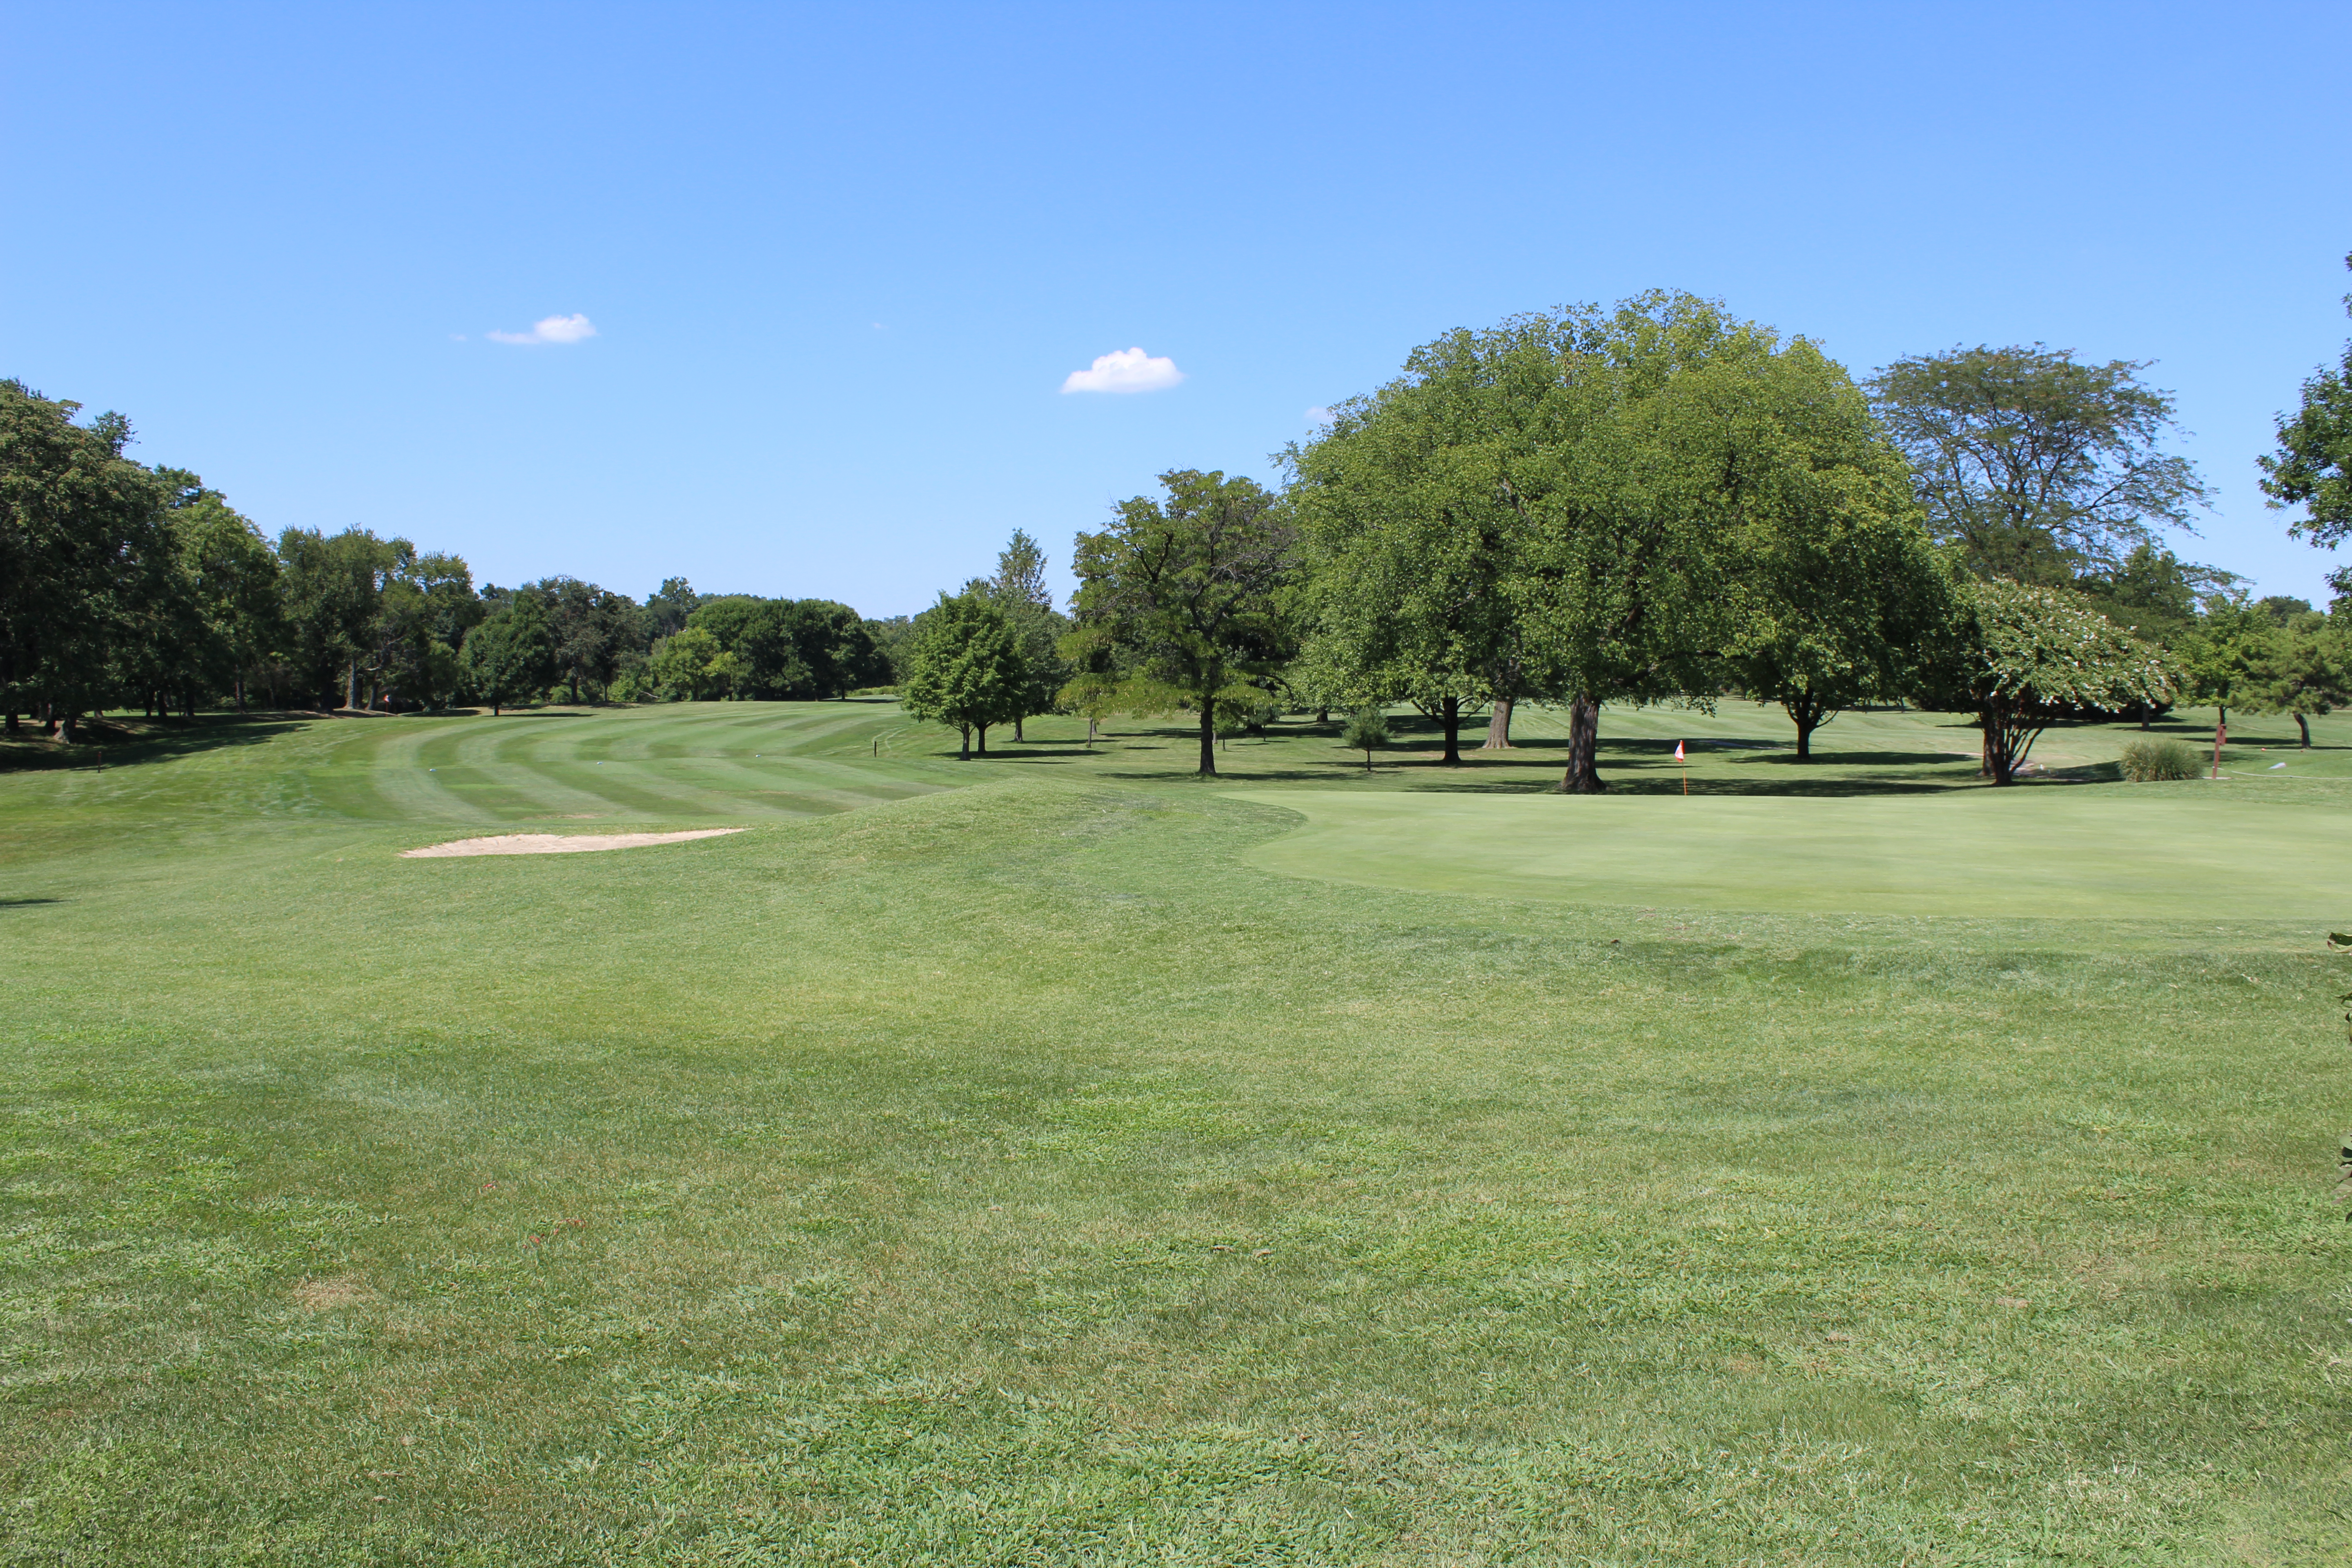 Looking at the Carroll Park Golf Course, a Baltimore City course where the Monumental Golf Club played.